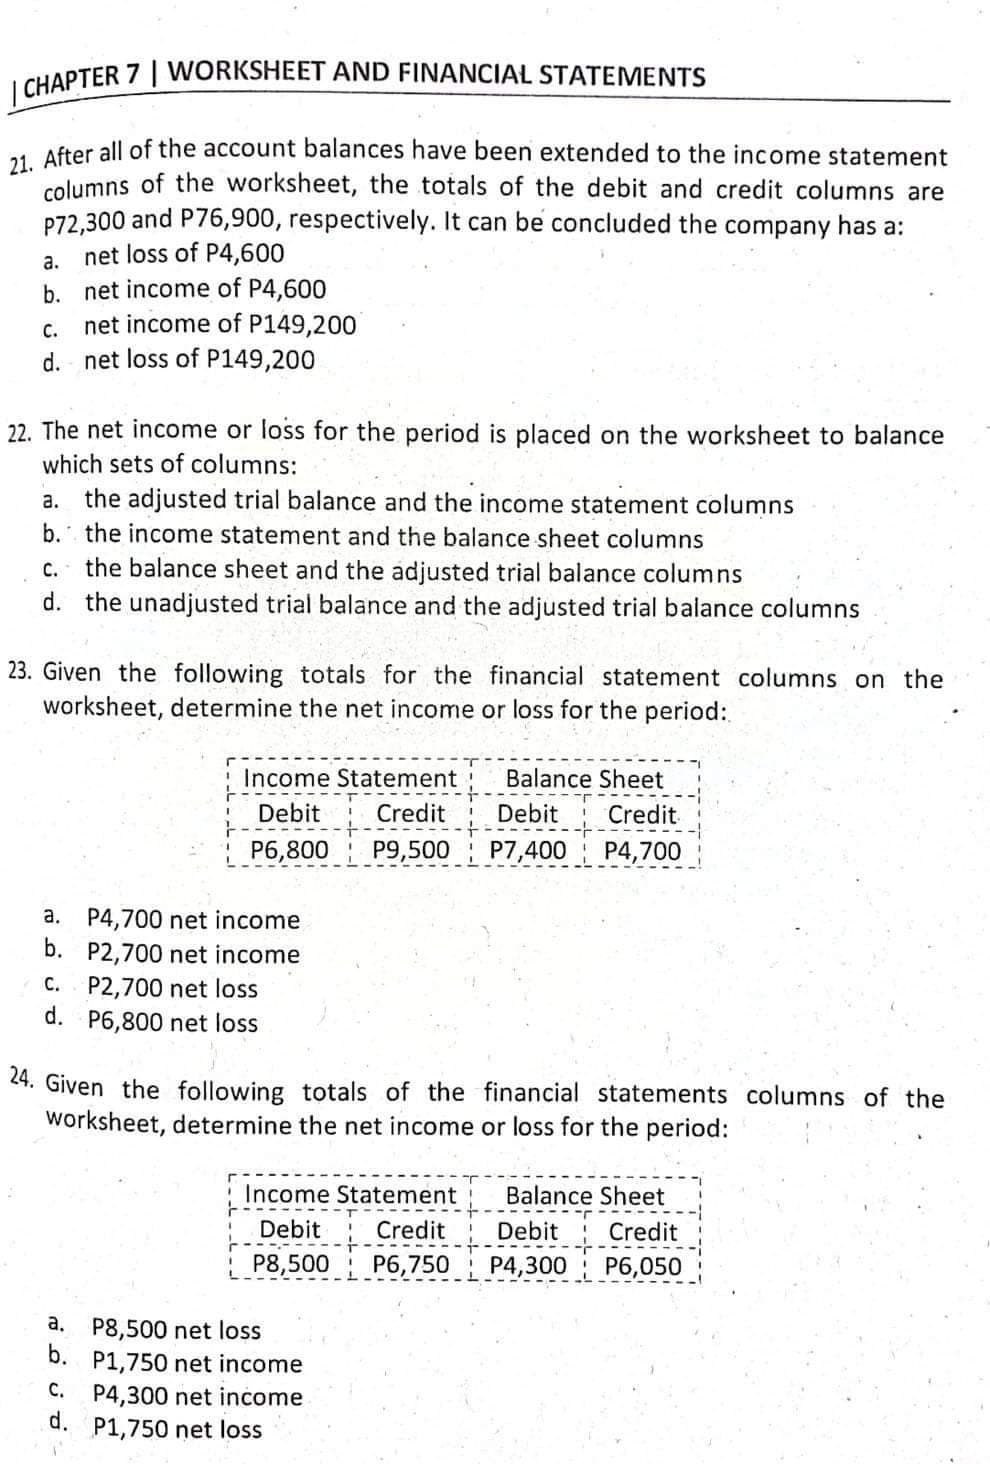 | CHAPTER 7 | WORKSHEET AND FINANCIAL STATEMENTS
. After all of the account balances have been extended to the income statement
columns of the worksheet, the totals of the debit and credit columns are
P72,300 and P76,900, respectively. It can be concluded the company has a:
net loss of P4,600
b. net income of P4,600
net income of P149,200
d. net loss of P149,200
а.
С.
22. The net income or loss for the period is placed on the worksheet to balance
which sets of columns:
a.
the adjusted trial balance and the income statement columns
b. the income statement and the balance sheet columns
the balance sheet and the adjusted trial balance columns
d. the unadjusted trial balance and the adjusted trial balance columns
с.
23. Given the following totals for the financial statement columns on the
worksheet, determine the net income or loss for the period:
Income Statement
Balance Sheet
Debit
Credit
Debit
Credit
P6,800
Р9,500
P7,400
P4,700
a. P4,700 net income
b. P2,700 net income
C. P2,700 net loss
d. P6,800 net loss
24. Given the following totals of the financial statements columns of the
worksheet, determine the net income or loss for the period:
Income Statement
Balance Sheet
Debit
Credit
Debit Credit
P8,500
P6,750 P4,300 P6,050
a. P8,500 net loss
b. P1,750 net income
C. P4,300 net income
d. P1,750 net loss
